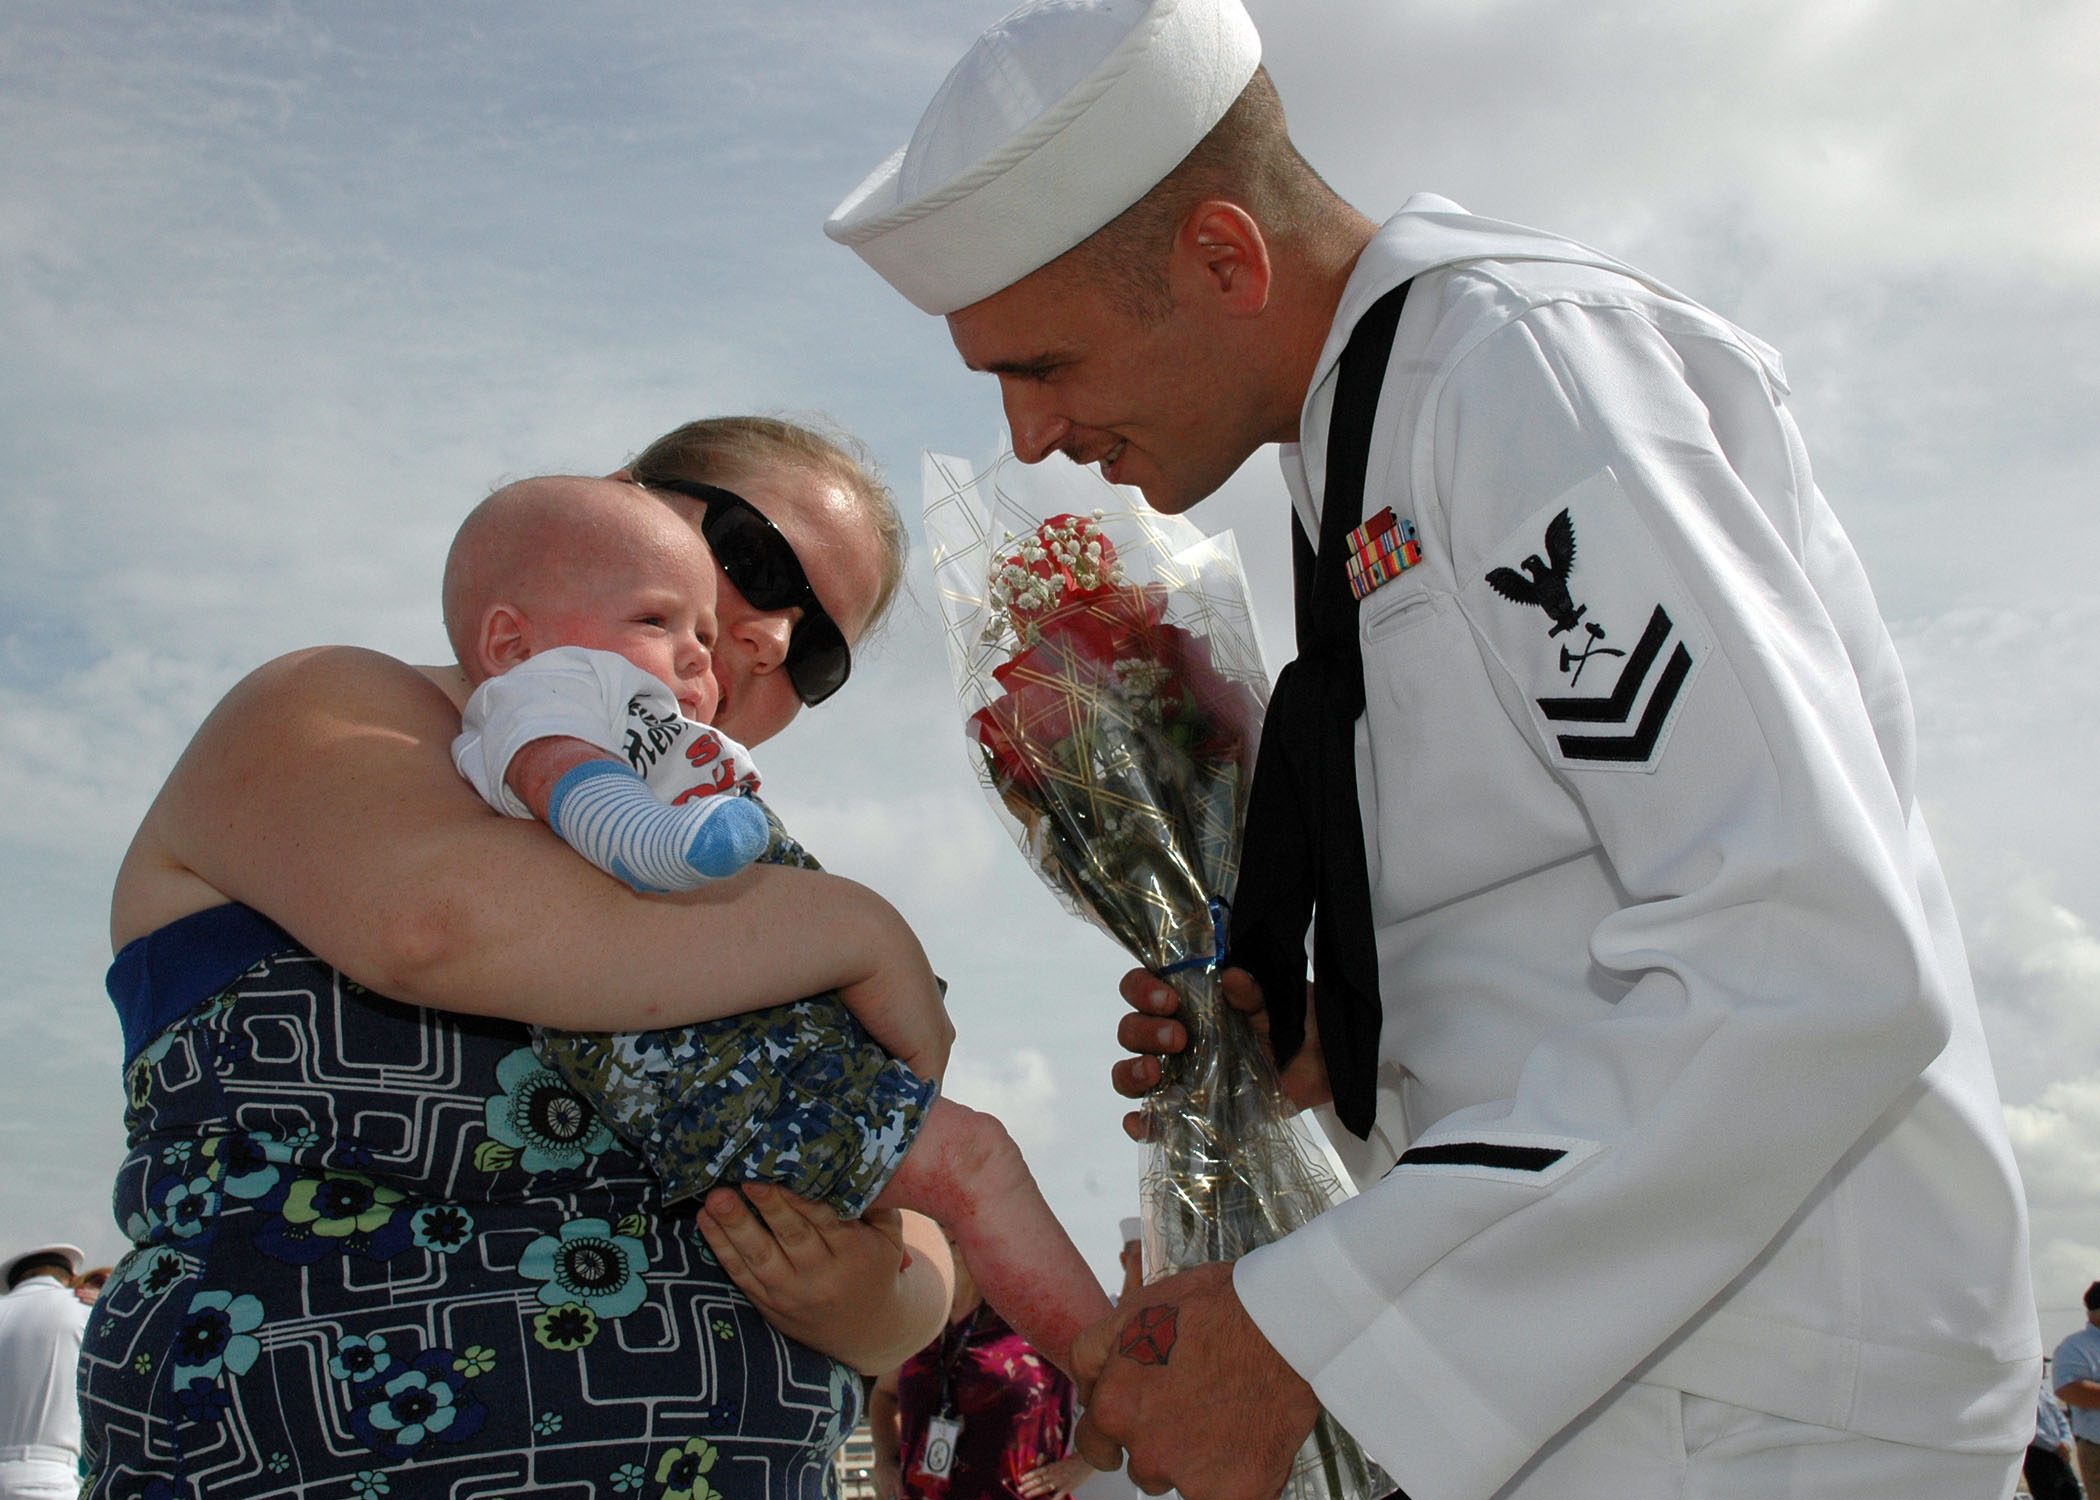 US Navy 090828-N-5292M-521 Damage Controlman 2nd Class Jeff McClure, assigned to the guided-missile destroyer USS Laboon (DDG 58), greets his 5-month-old son for the first time at Naval Station Norfolk, Va